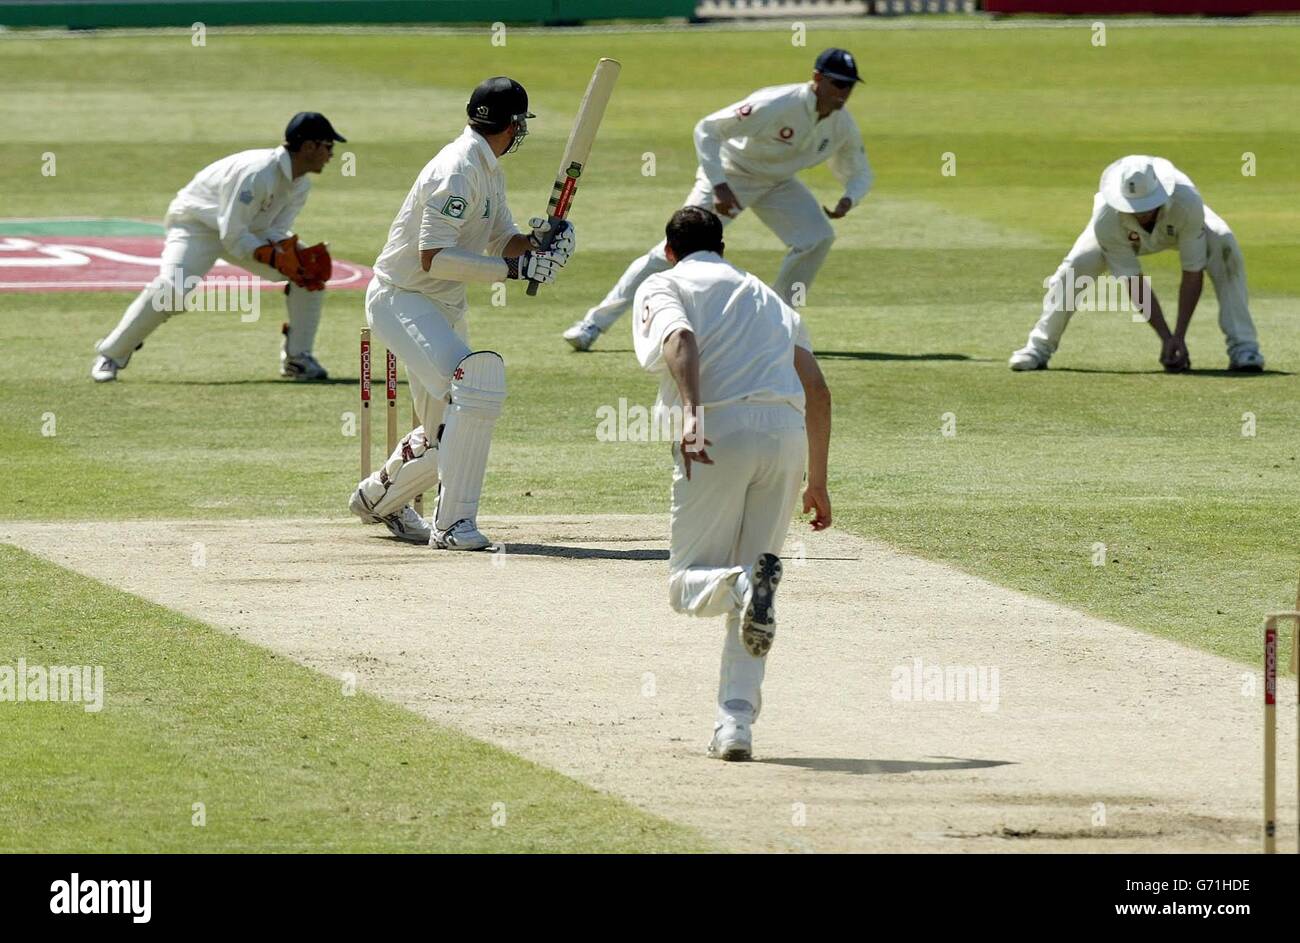 New Zealand's Jacob Oram is caught by England's Andrew Flintoff off the bowling of Steve Harmison on the fourth day of the third npower test against New Zealand at Trent Bridge, Nottingham. Stock Photo